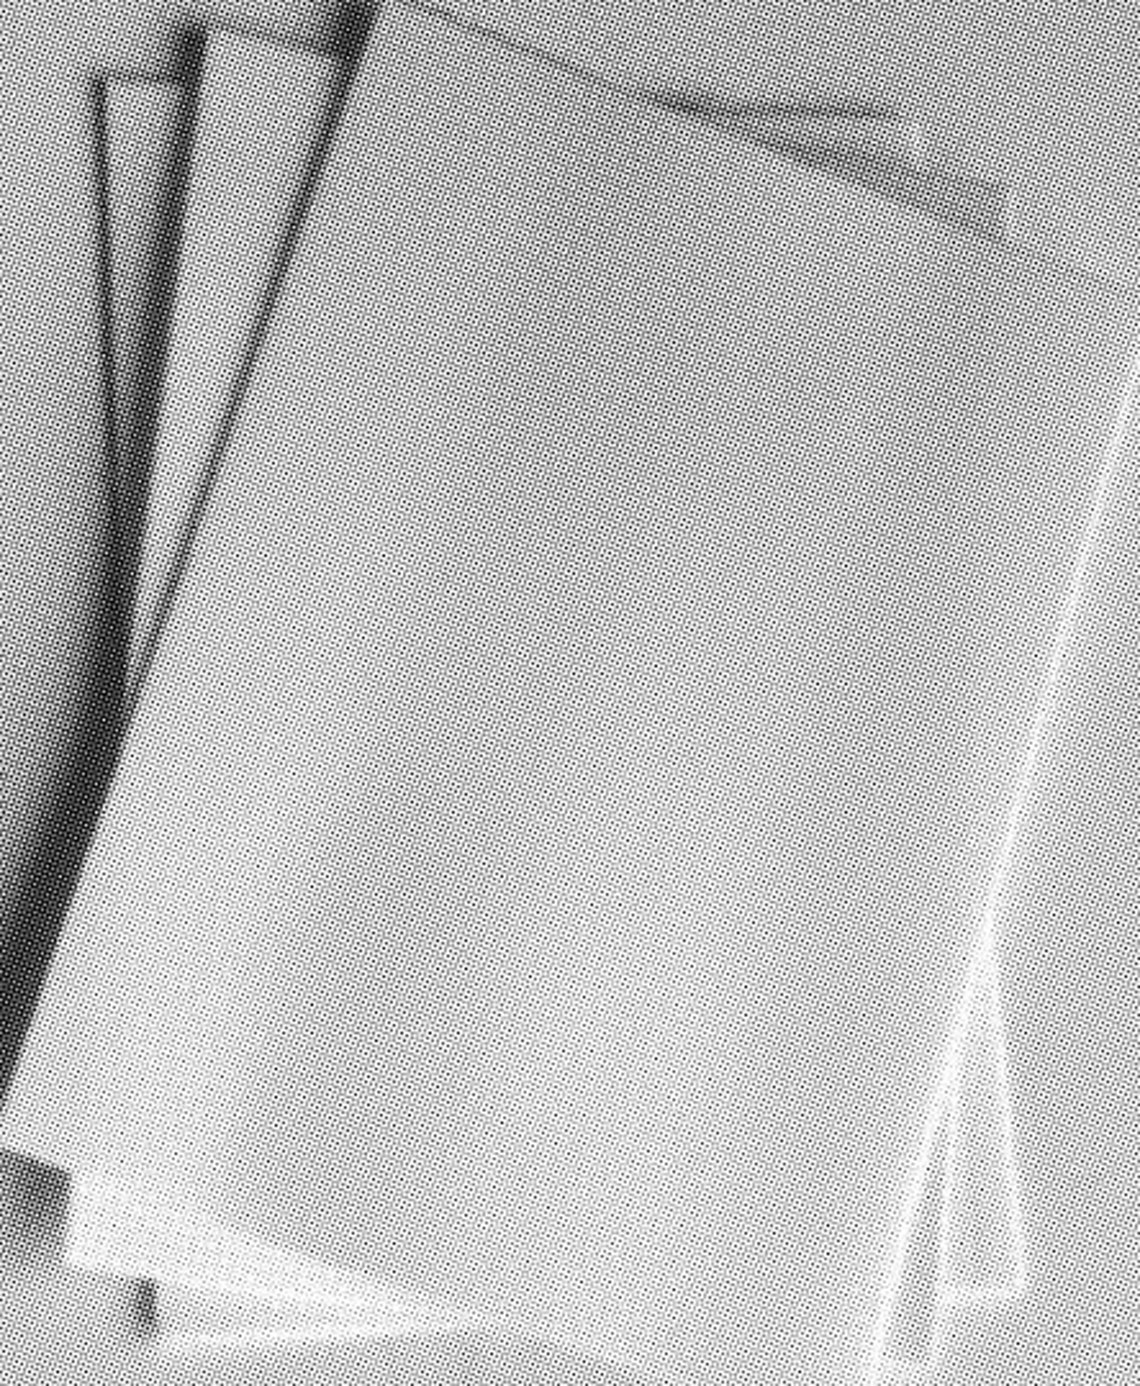 Foam Backing Material for roller-printing package of 5 | Etsy